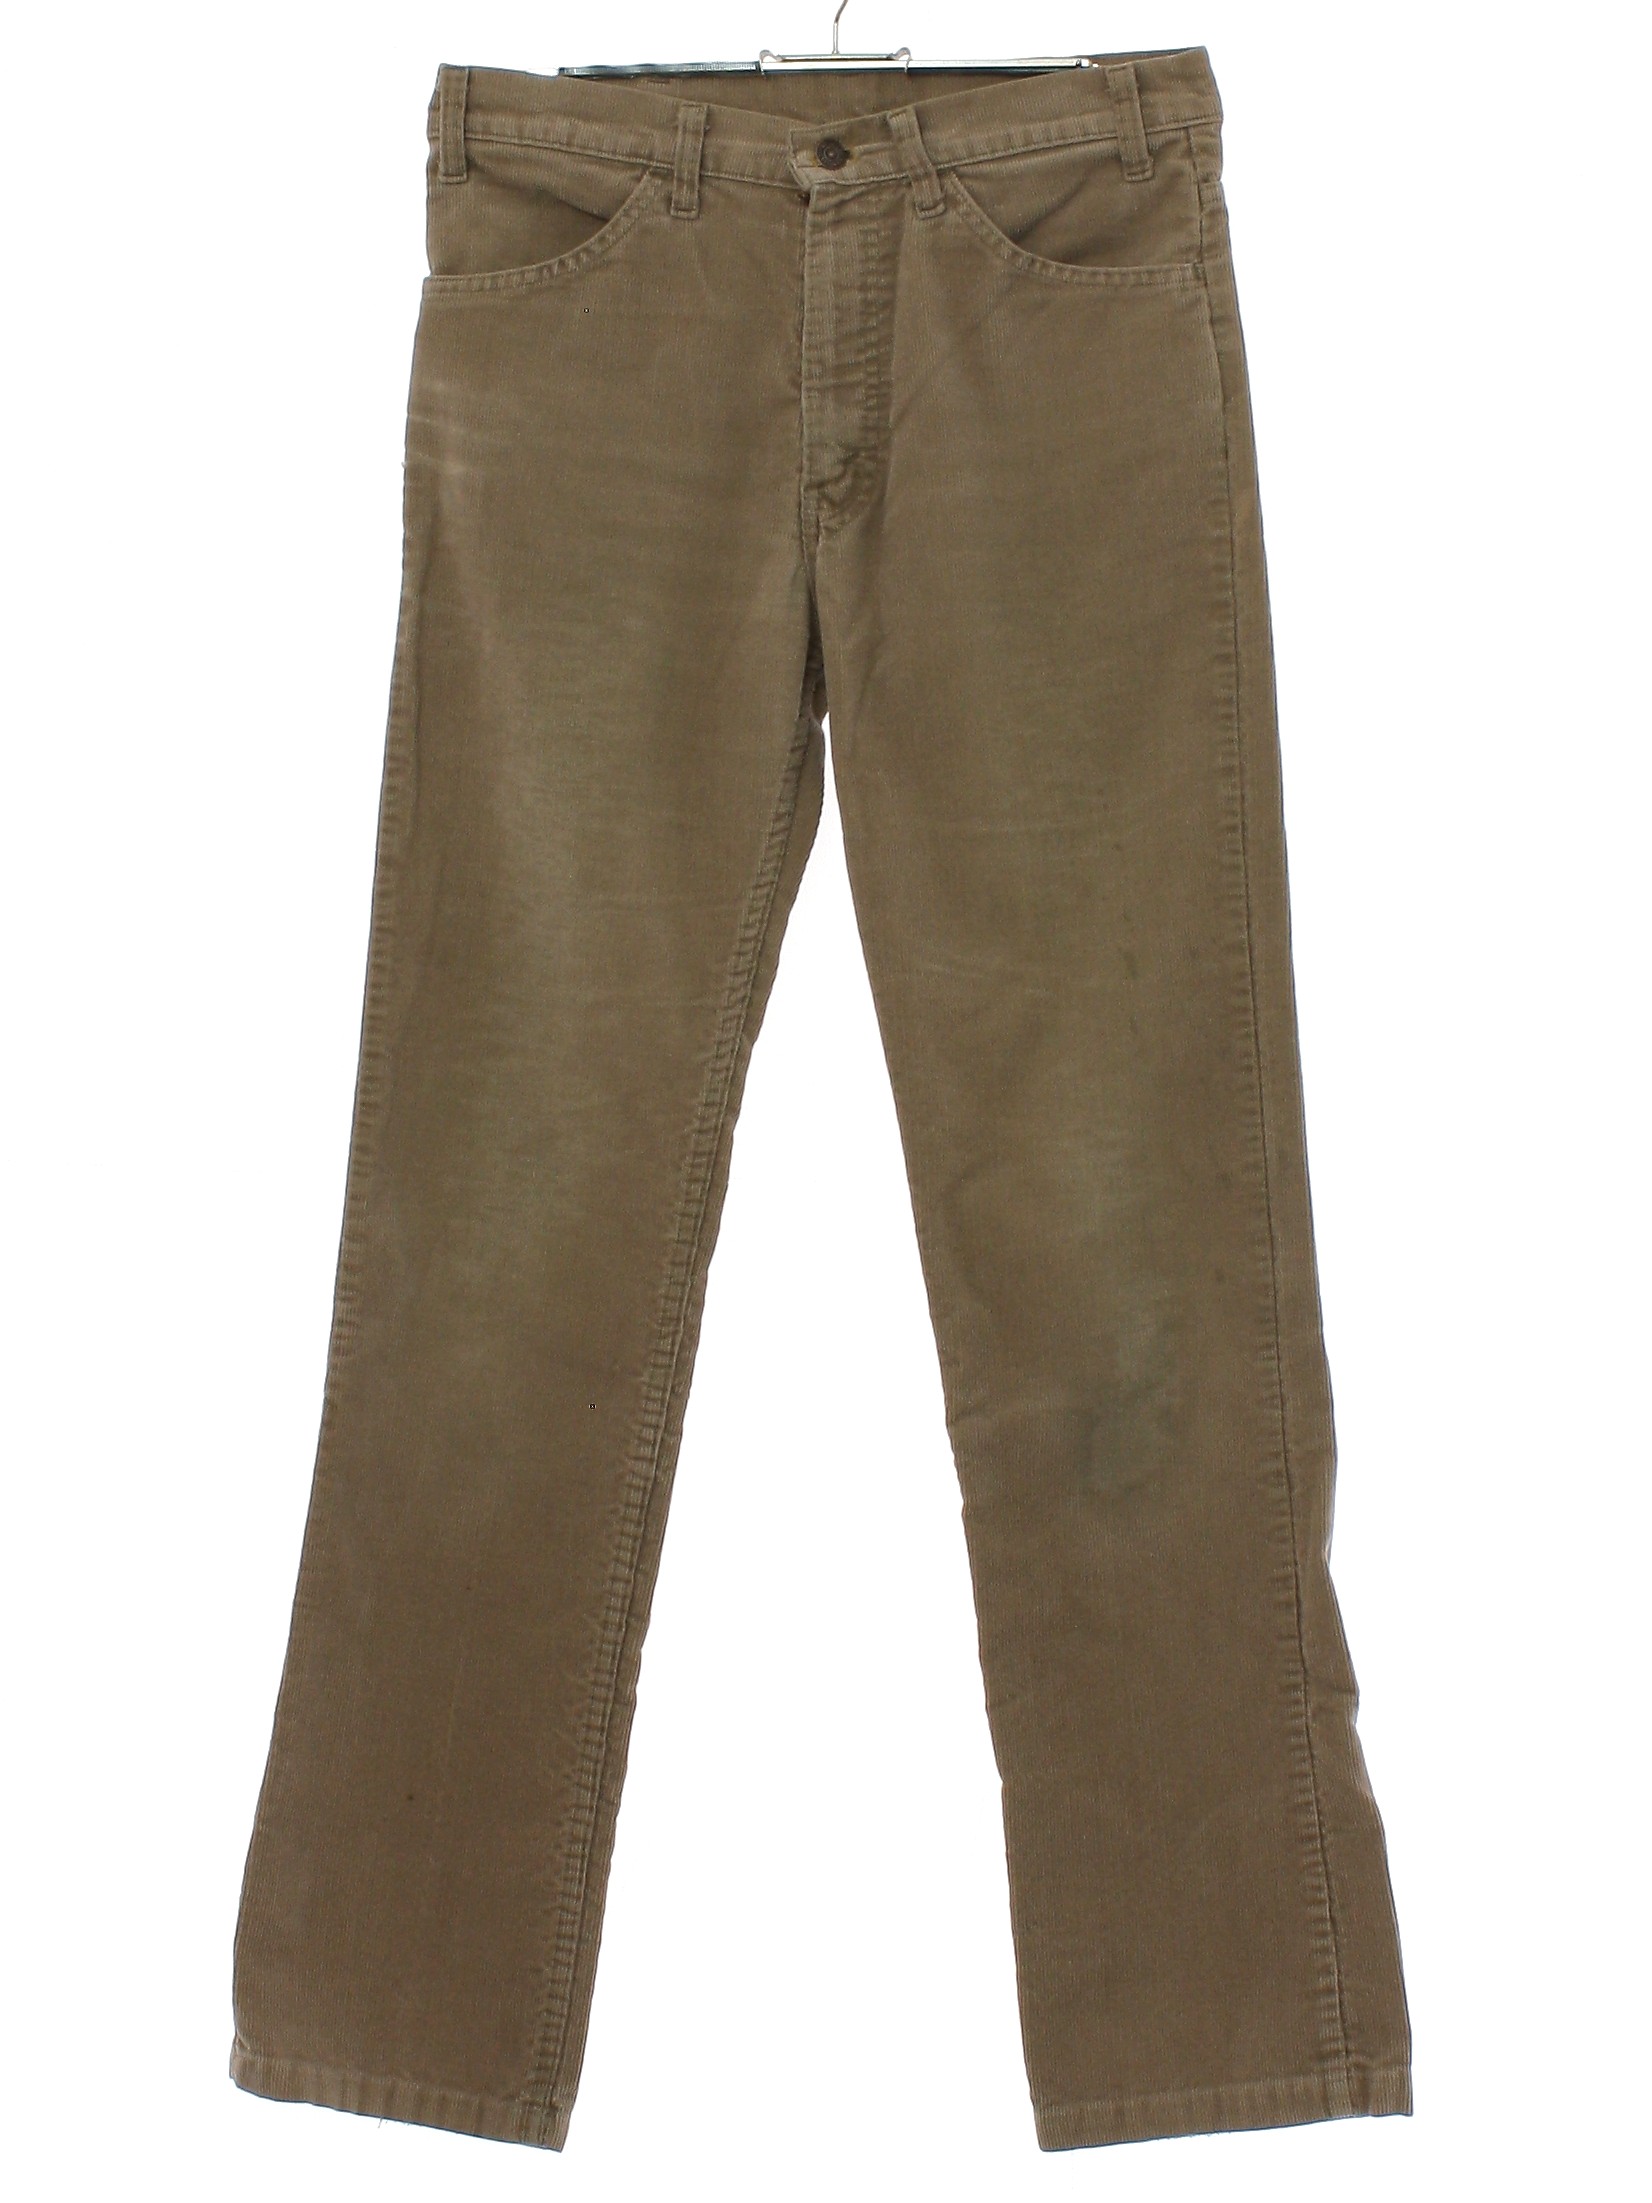 70s Vintage Levis 515 Pants: 70s or early 80s -Levis 515- Mens beige  background cotton polyester standard wale corduroy, four pocket straight  leg corduroy pants with front button and metal zipper closure,